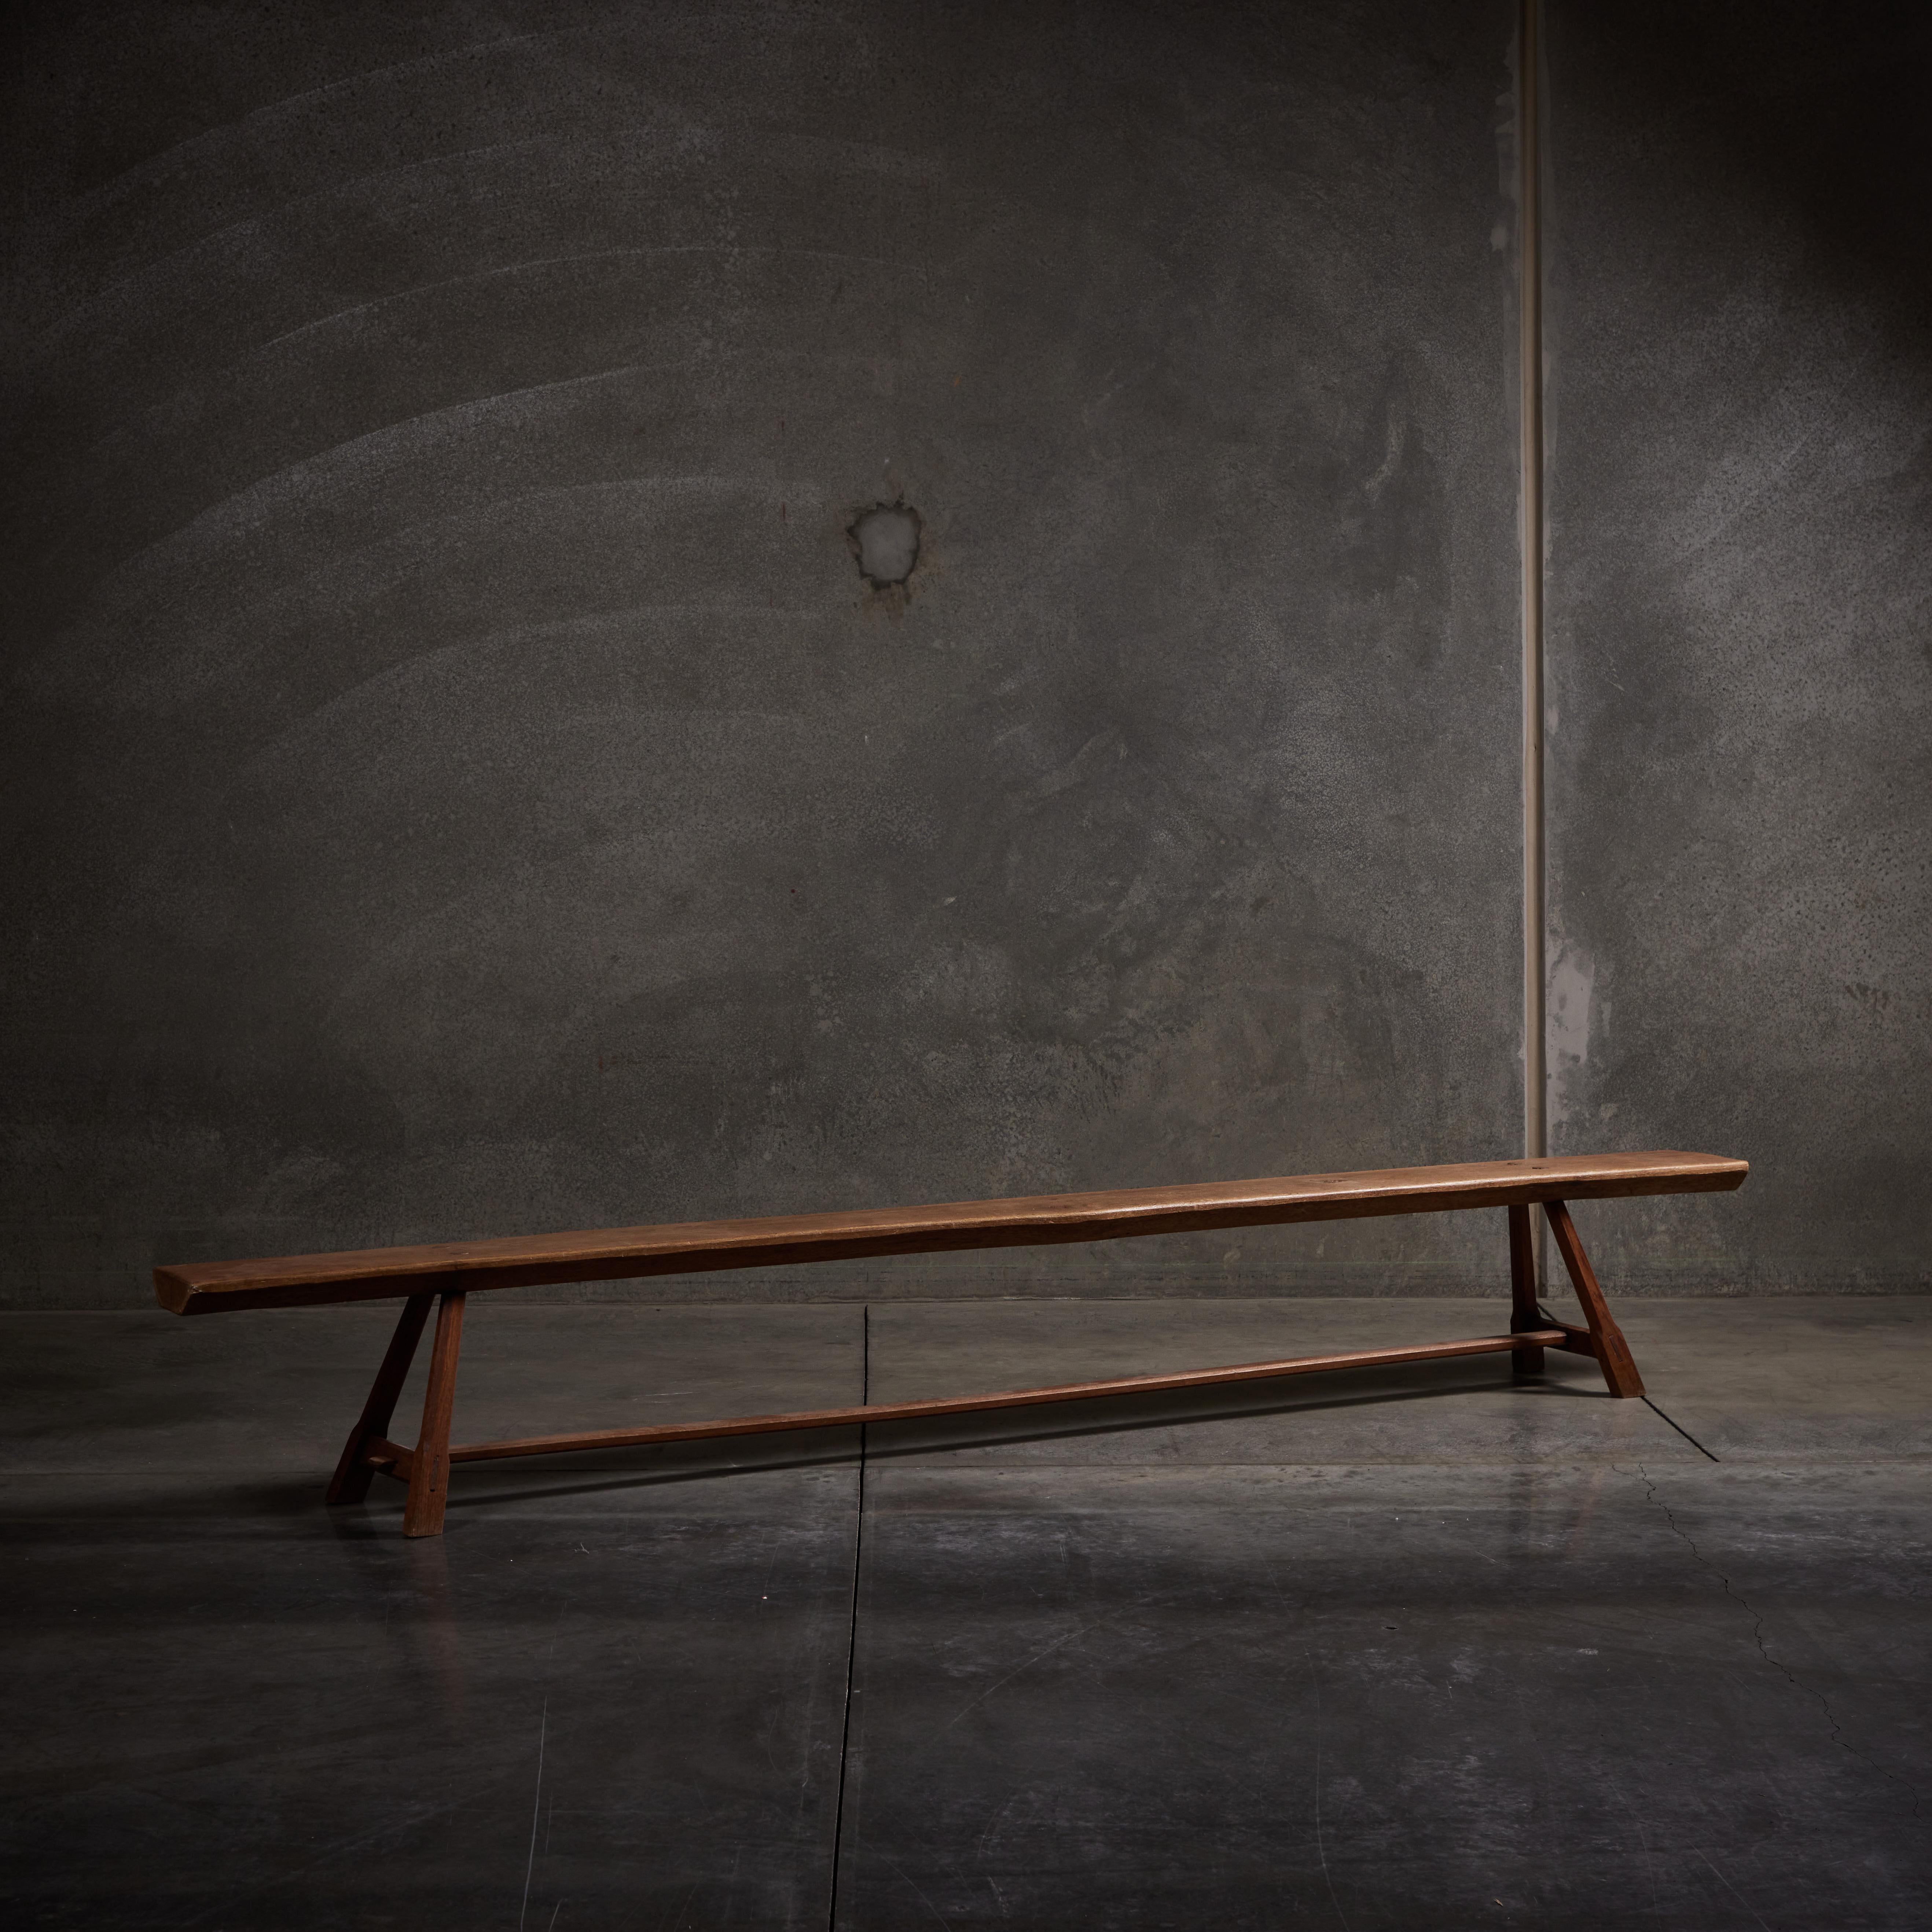 Extra long handmade oak trestle bench. Made in France circa early 20th century.